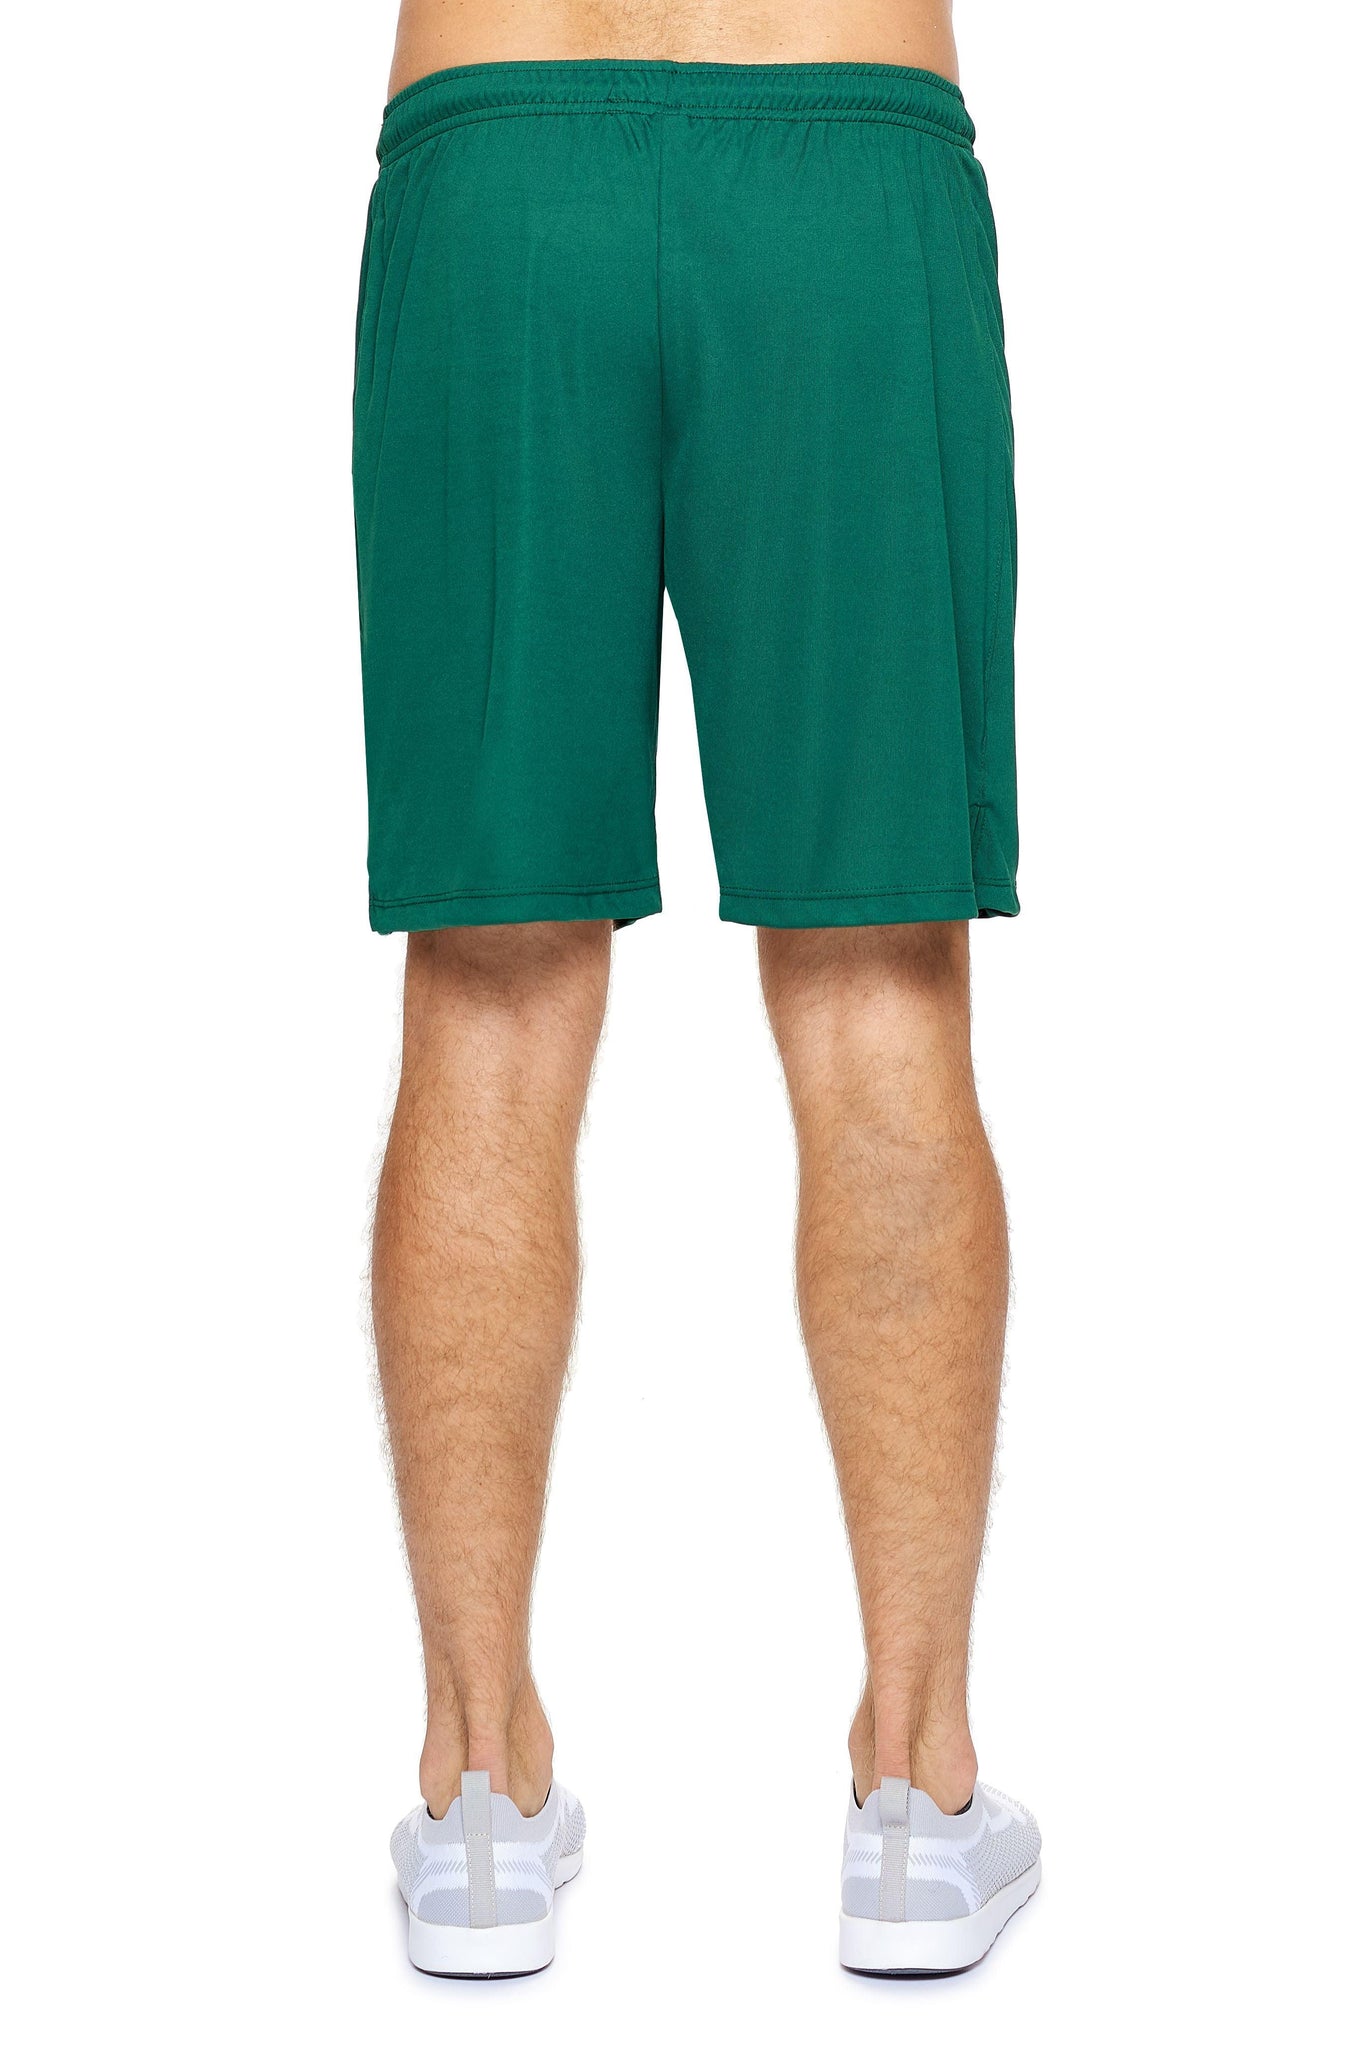 Expert Brand Men's Forest Green pk MaX™ Impact Shorts Image 2#forest-green